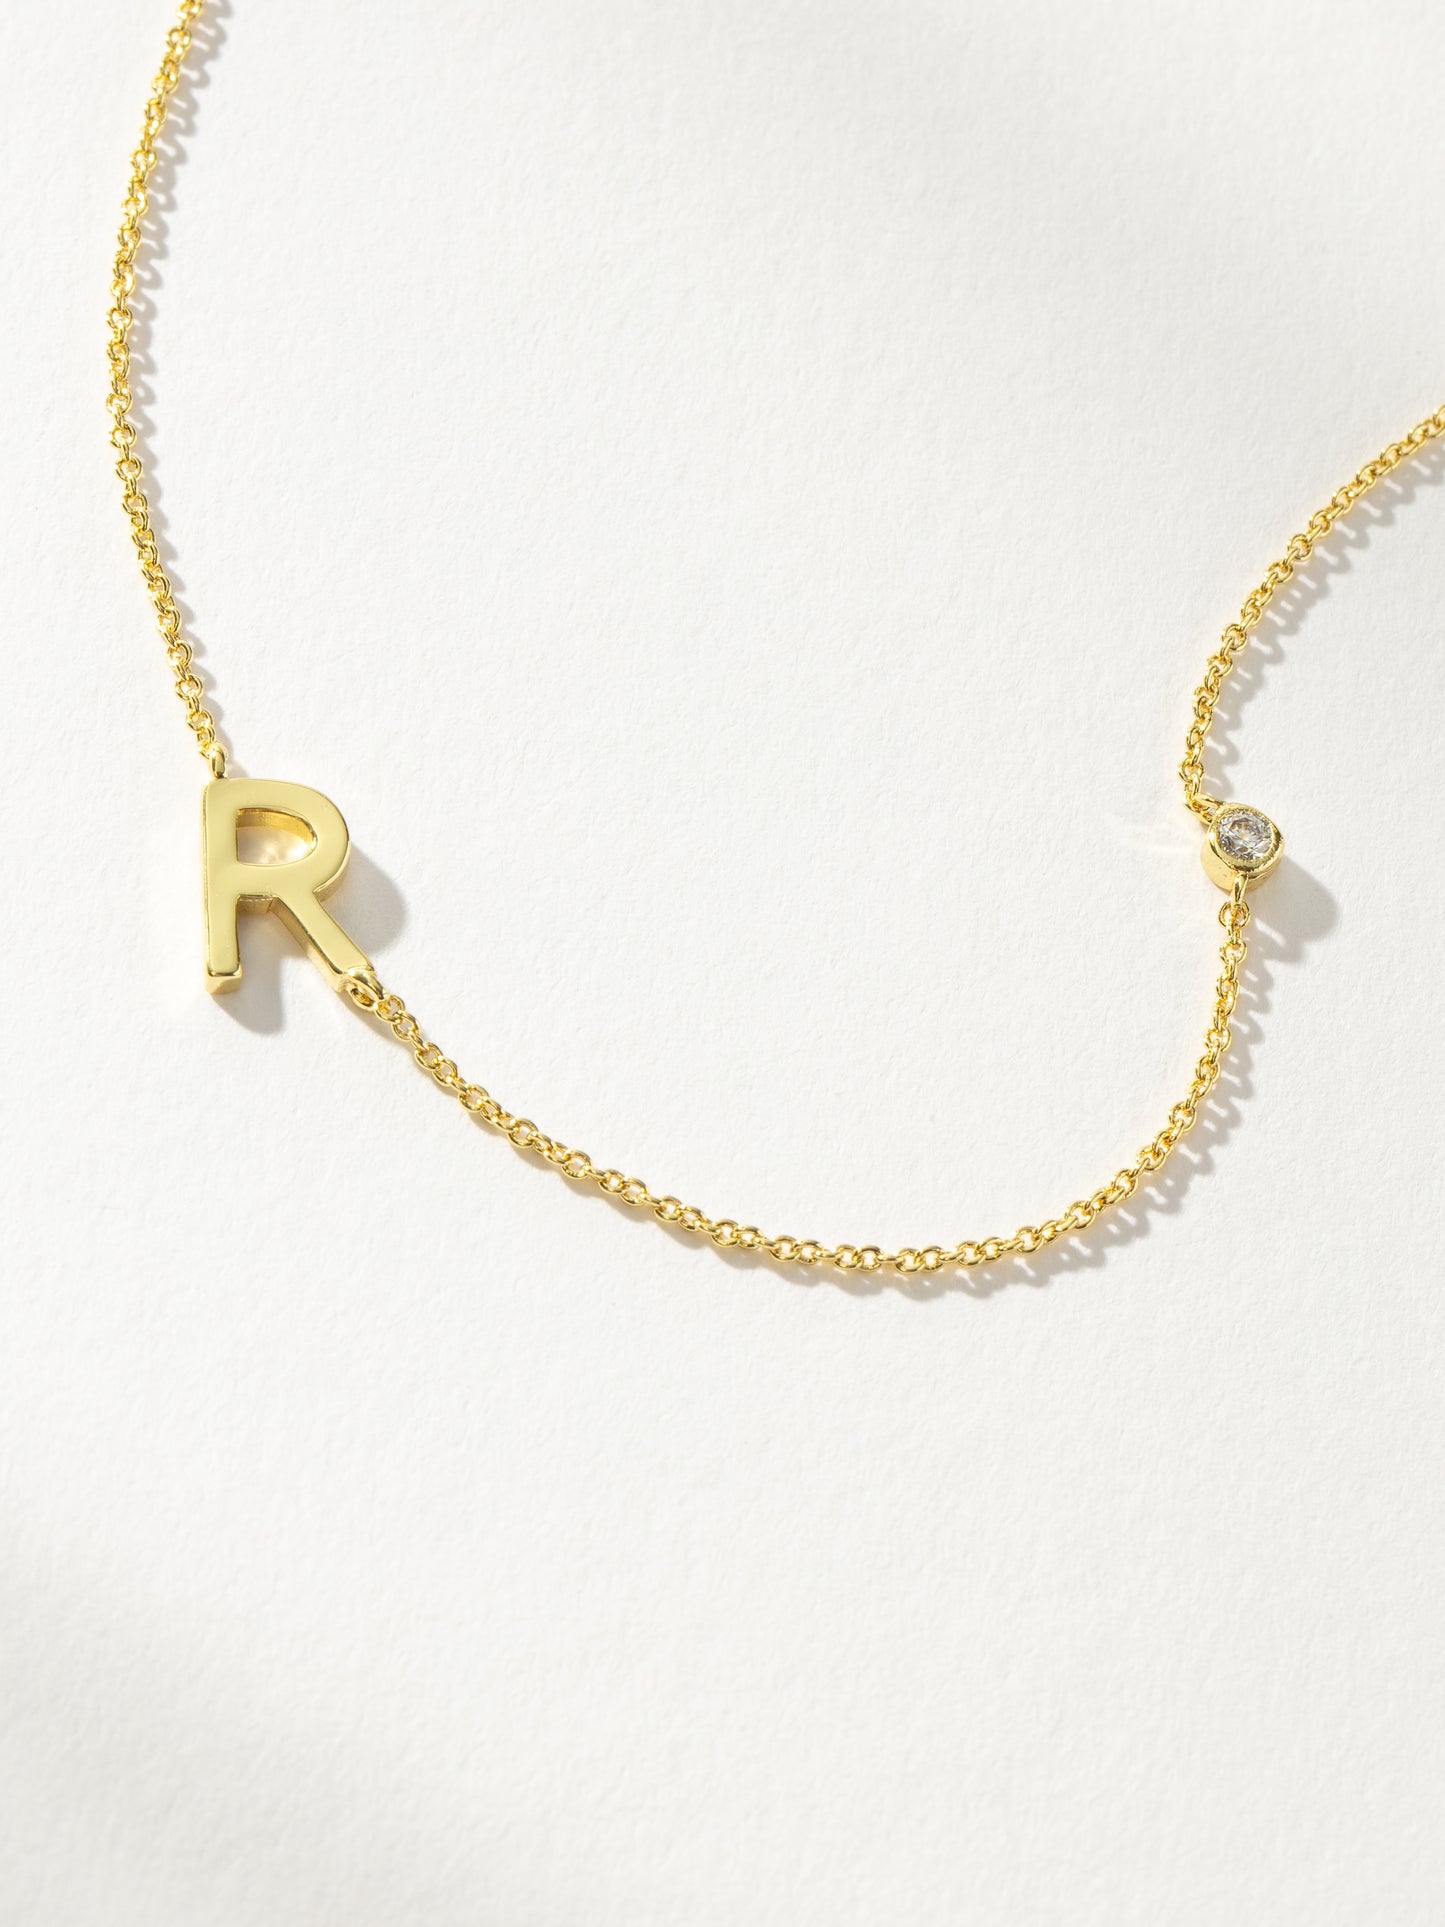 Personalized Touch Necklace | Gold R | Product Image | Uncommon James